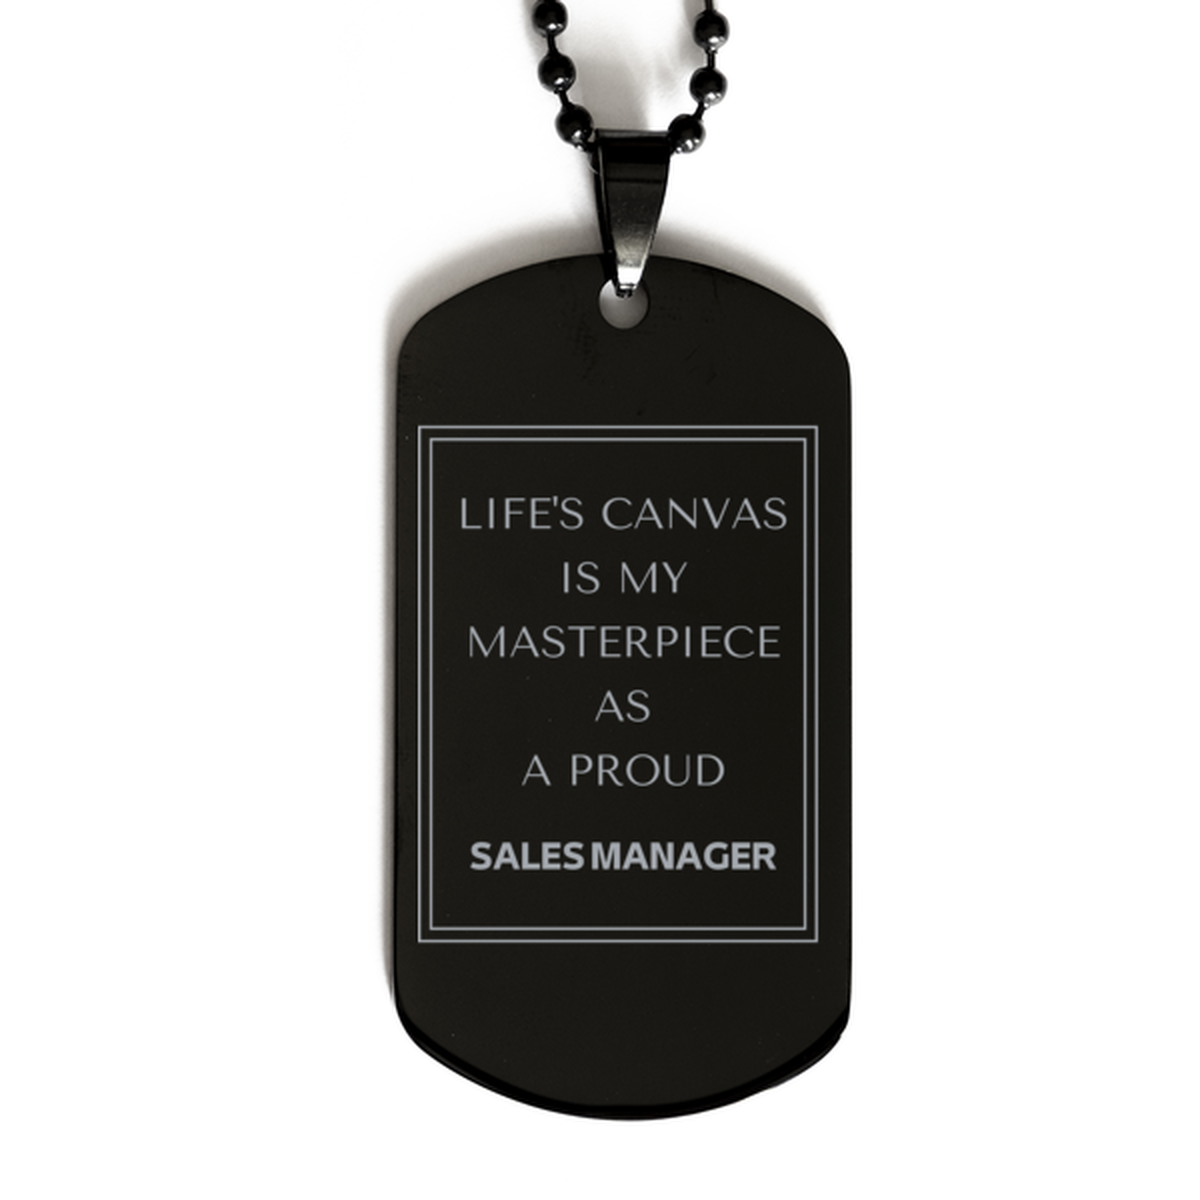 Proud Sales Manager Gifts, Life's canvas is my masterpiece, Epic Birthday Christmas Unique Black Dog Tag For Sales Manager, Coworkers, Men, Women, Friends